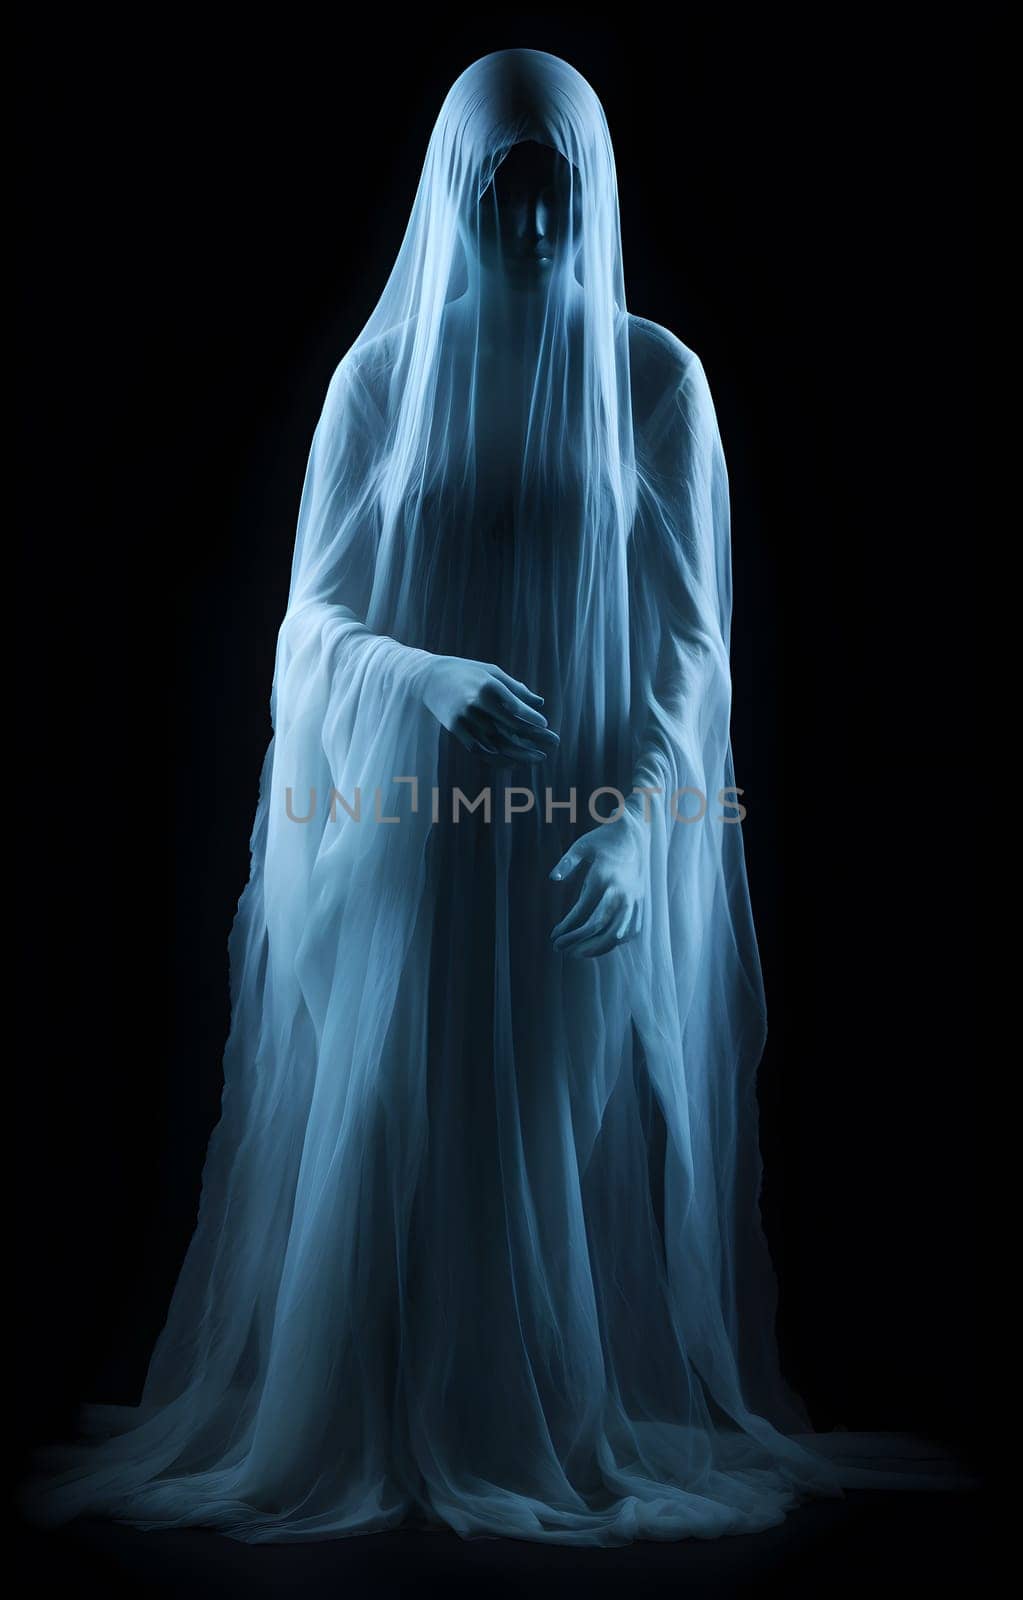 A ghost wearing a white veil by chrisroll